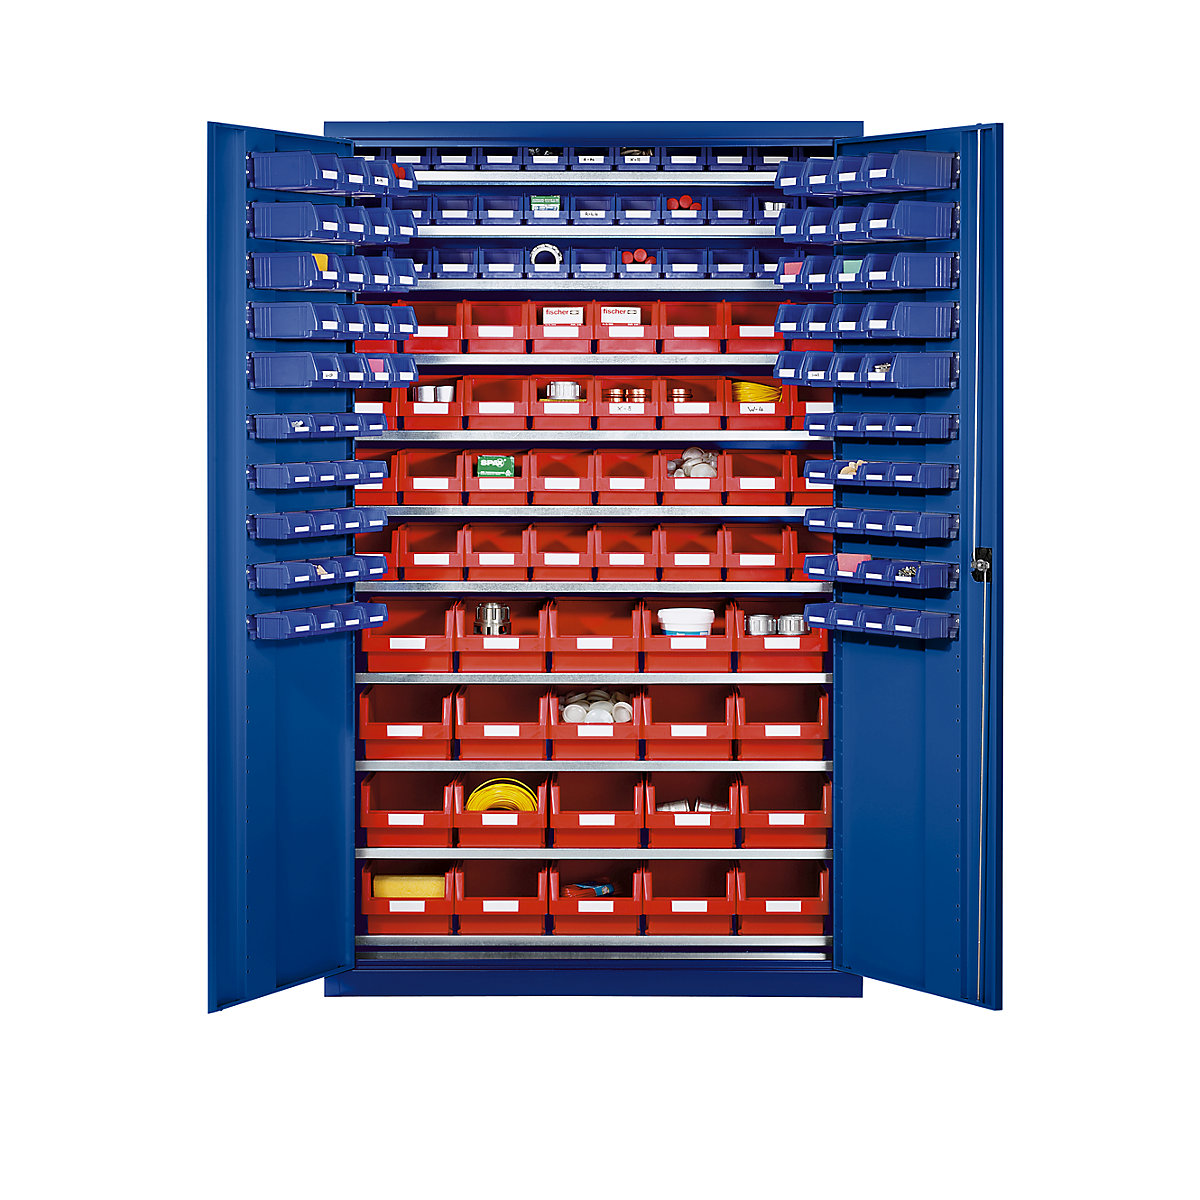 Large cupboard made of sheet steel – eurokraft pro, with 10 shelves, 165 open fronted storage bins, body and doors gentian blue-4